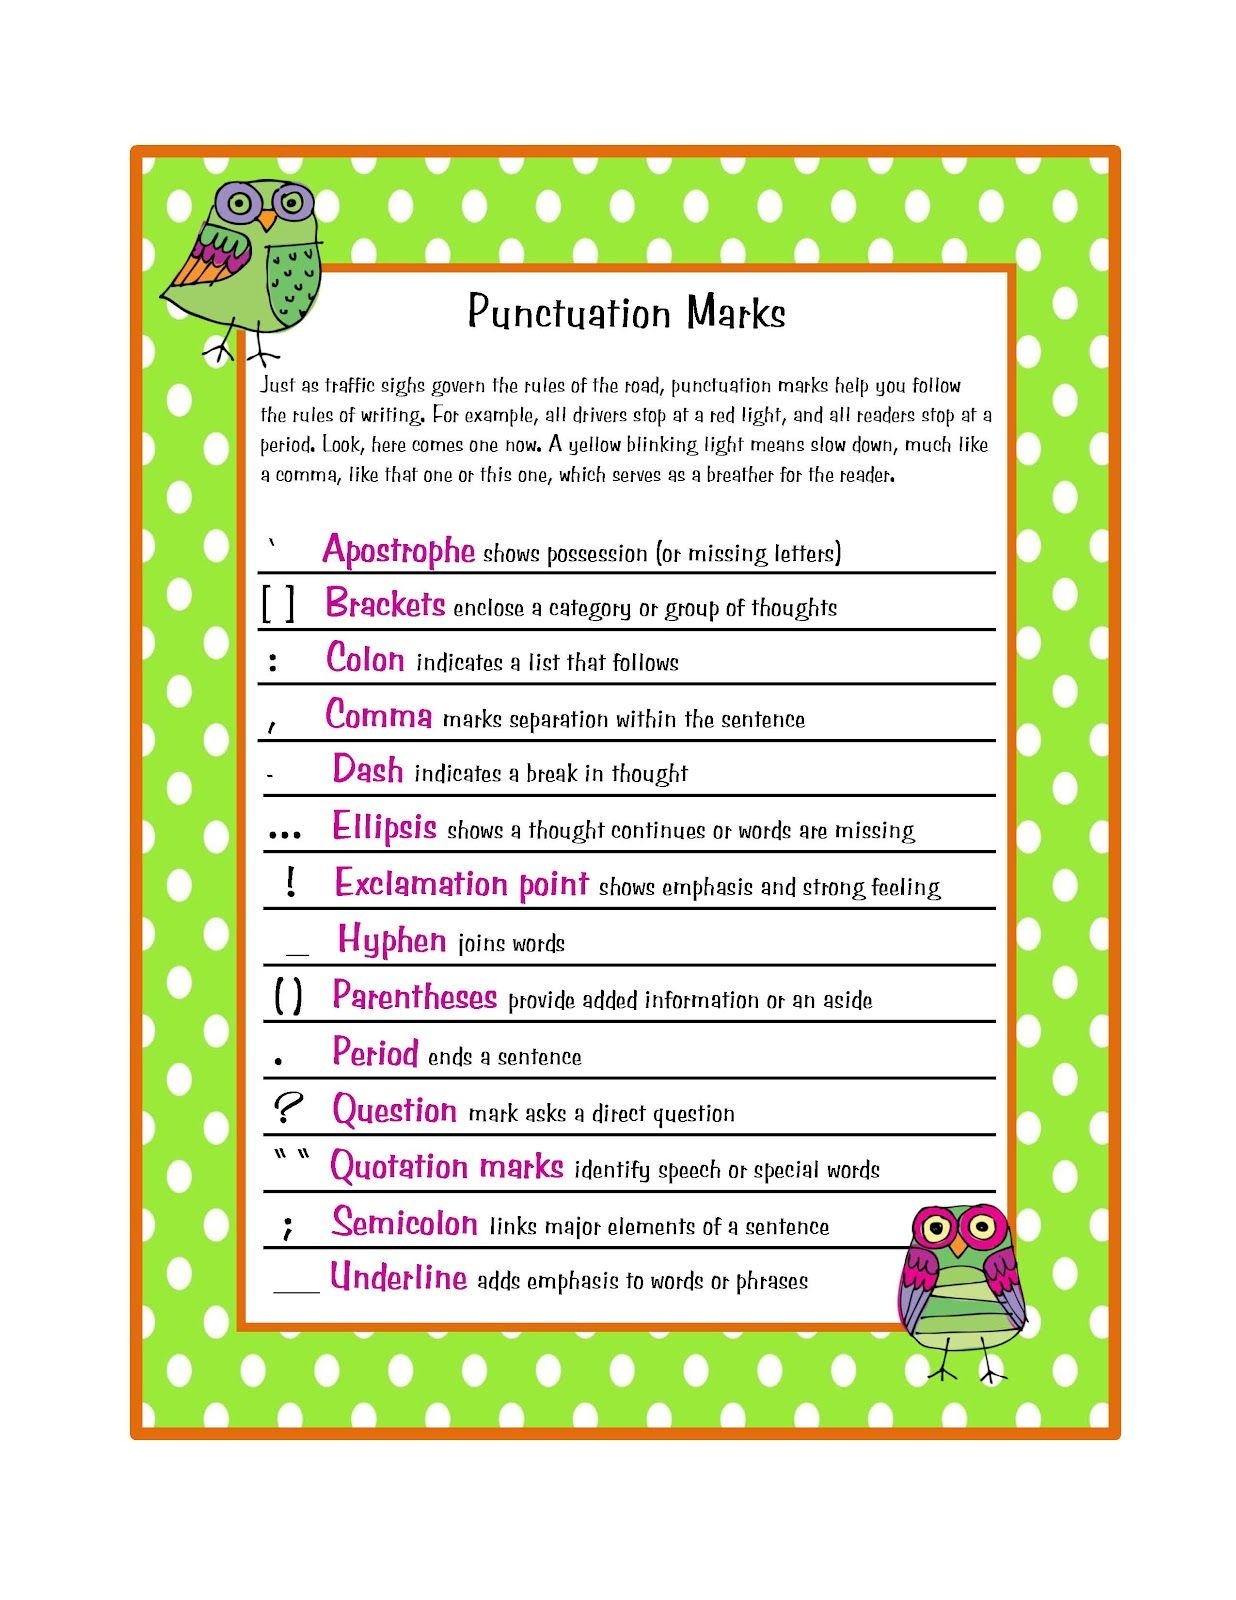 Free Punctuation Marks Poster | Preschool Printablesgwyn - Punctuation Posters Printable Free